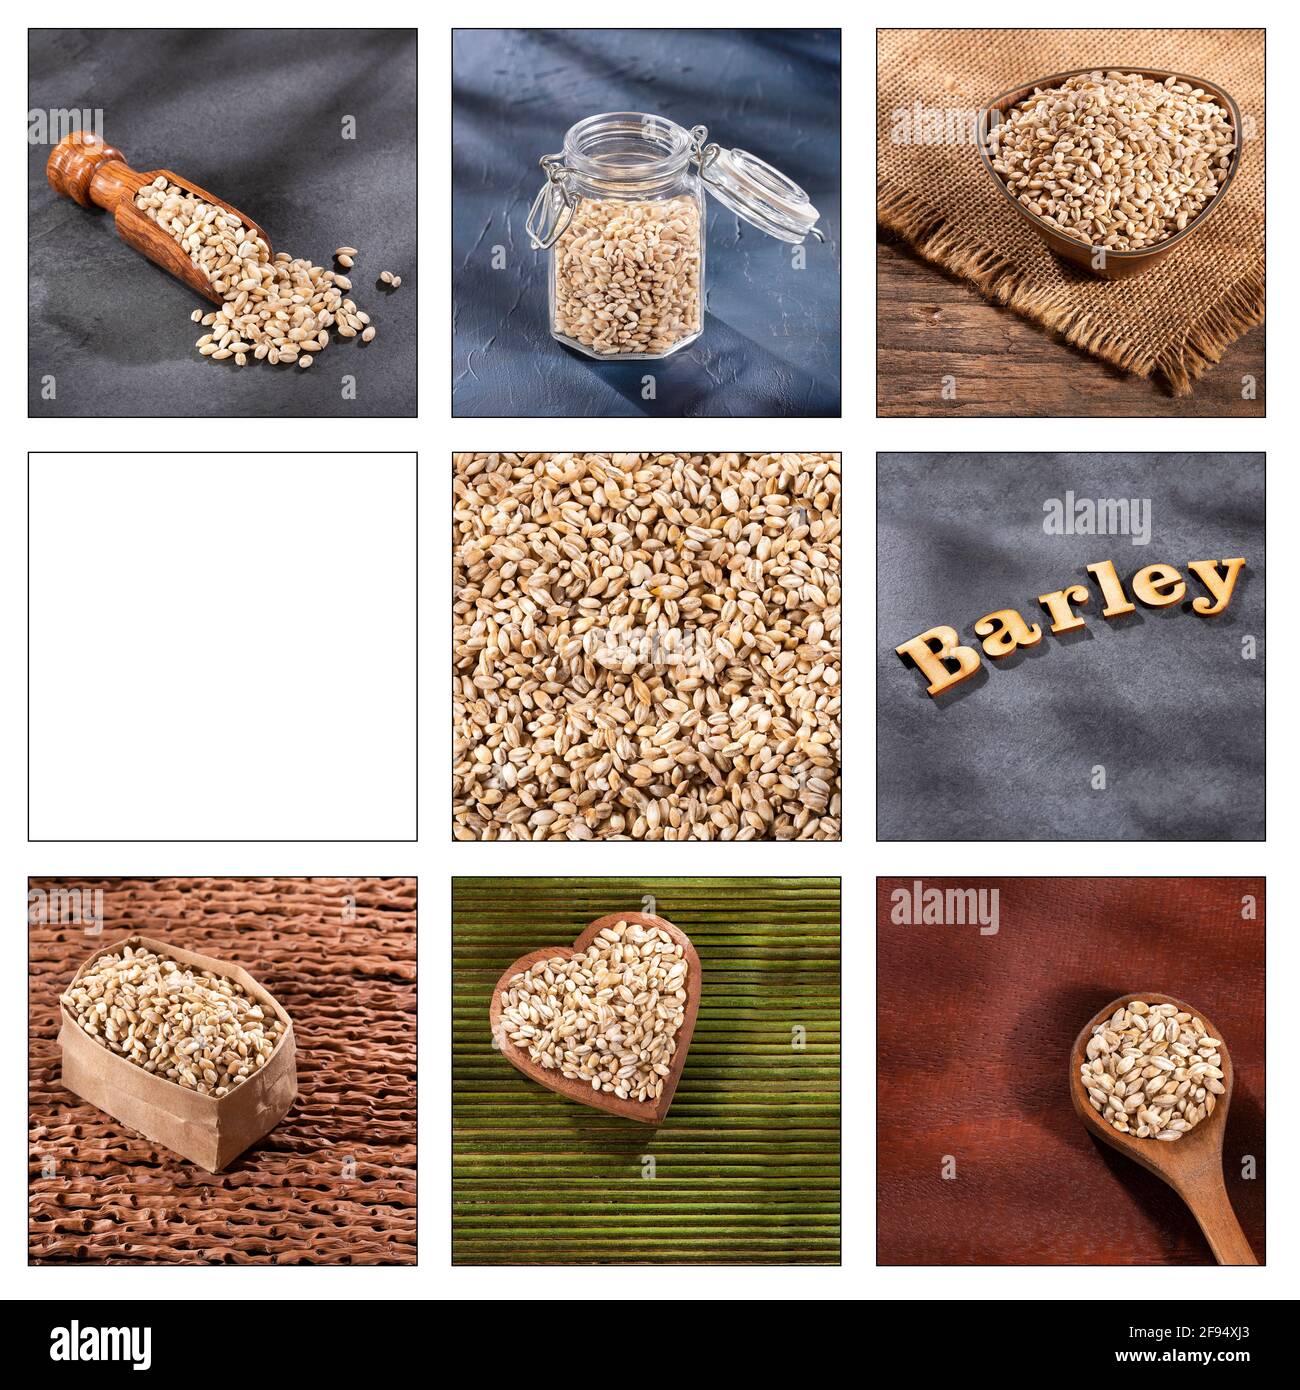 Hordeum vulgare - Creative collage of pearl barley images Stock Photo